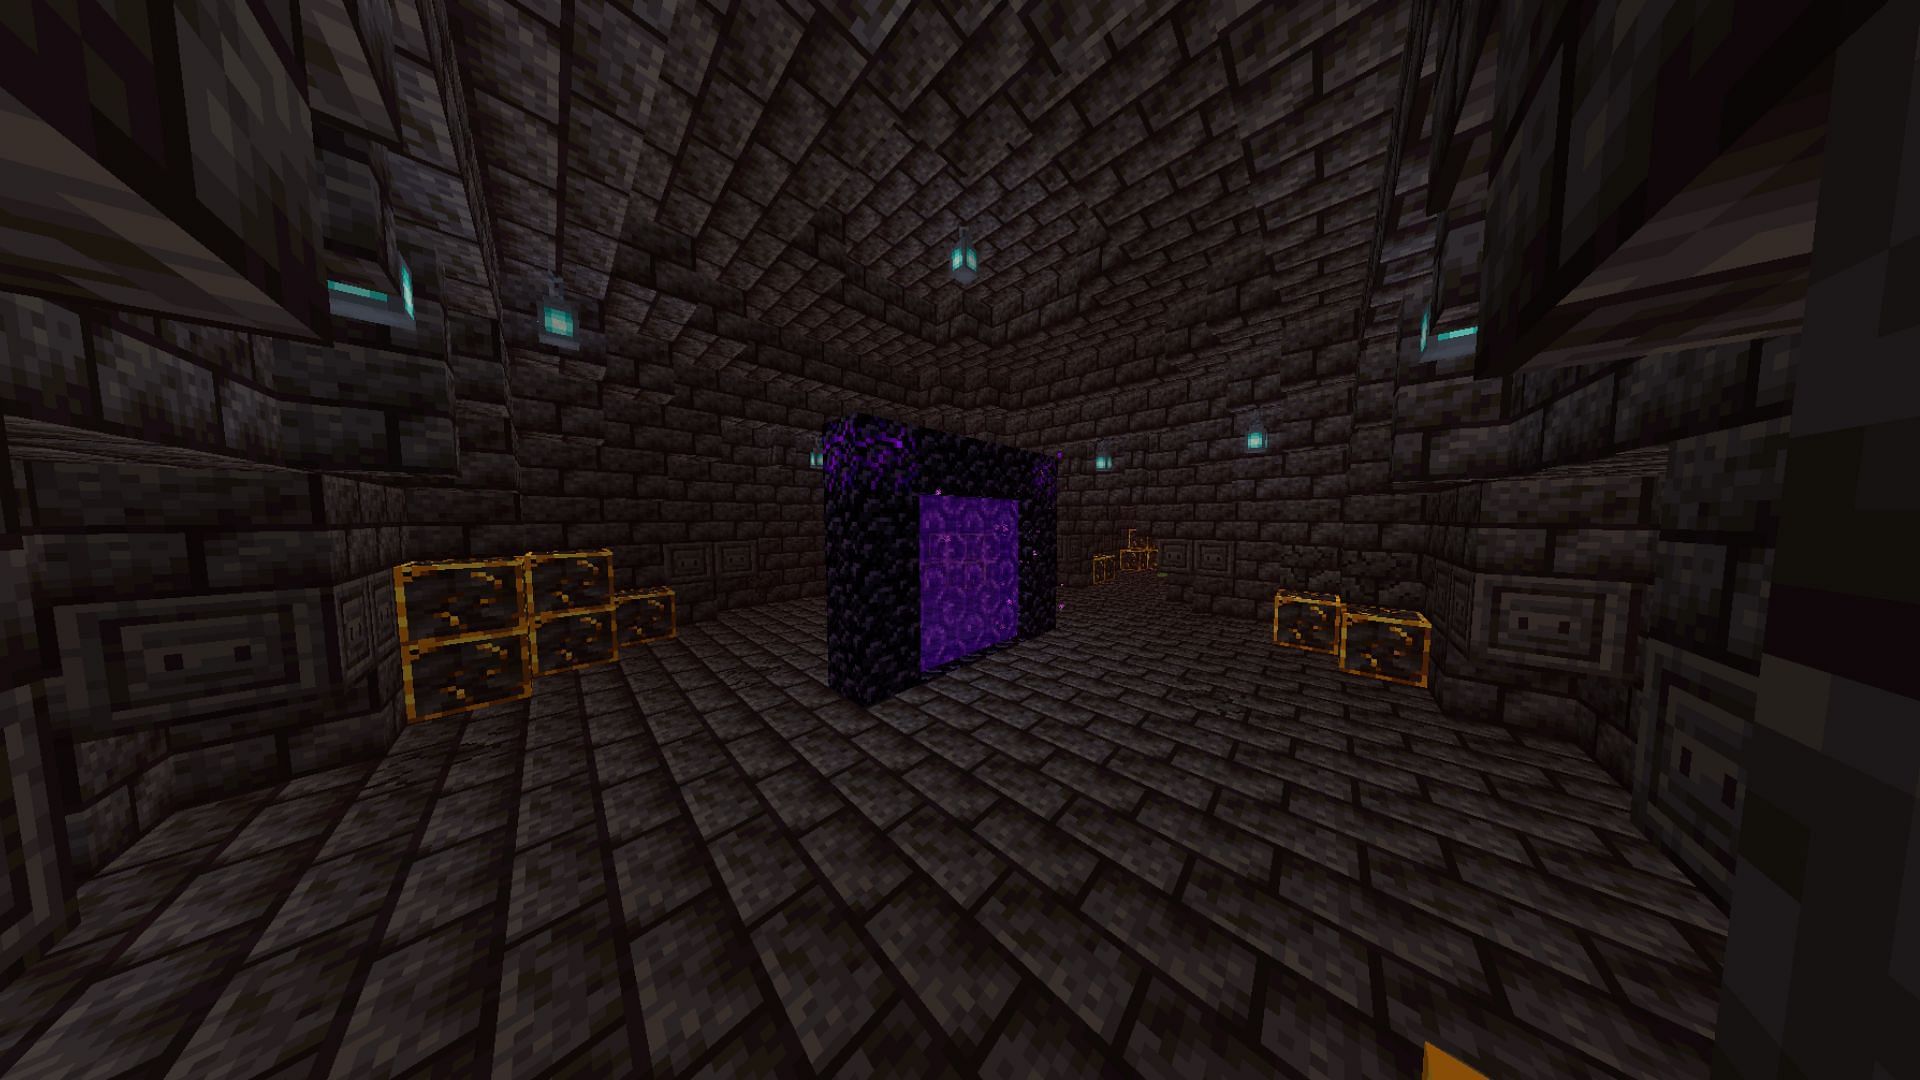 To protect the Nether portals, players can create a hub around them in Minecraft (Image via Reddit / u/Braguetta)